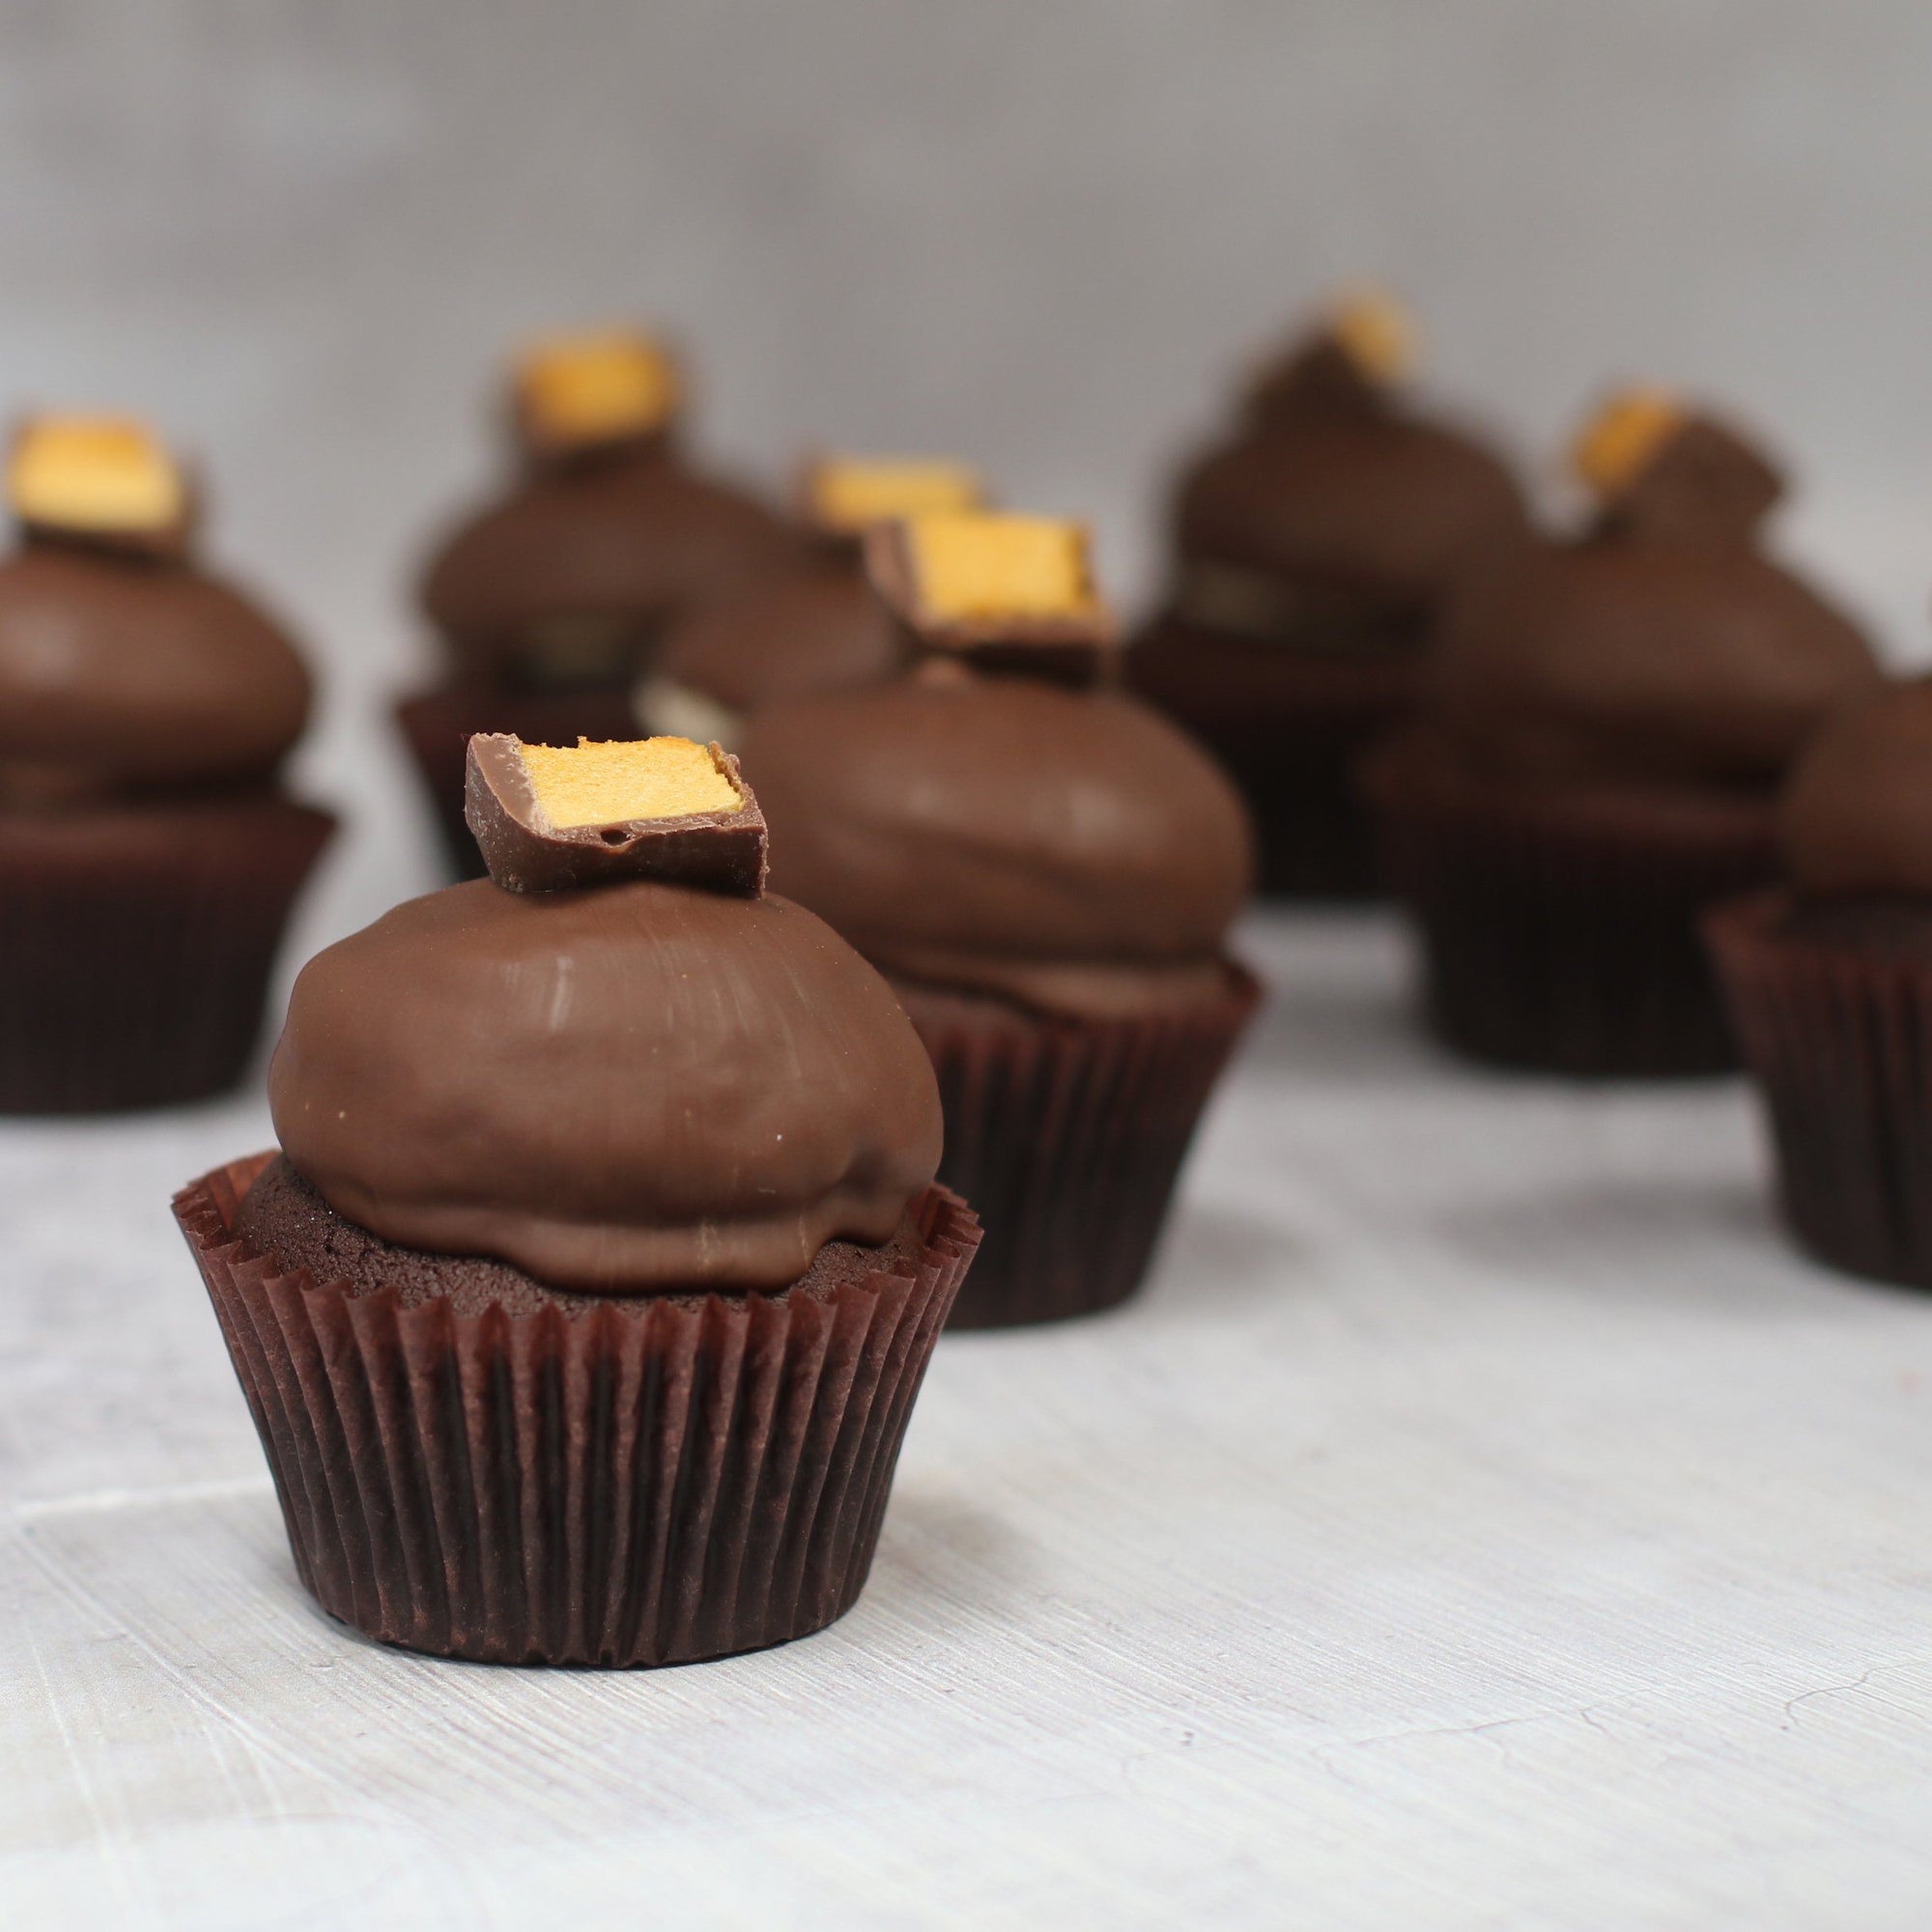 Choc Honeycomb Cupcakes The Cupcake Queens 